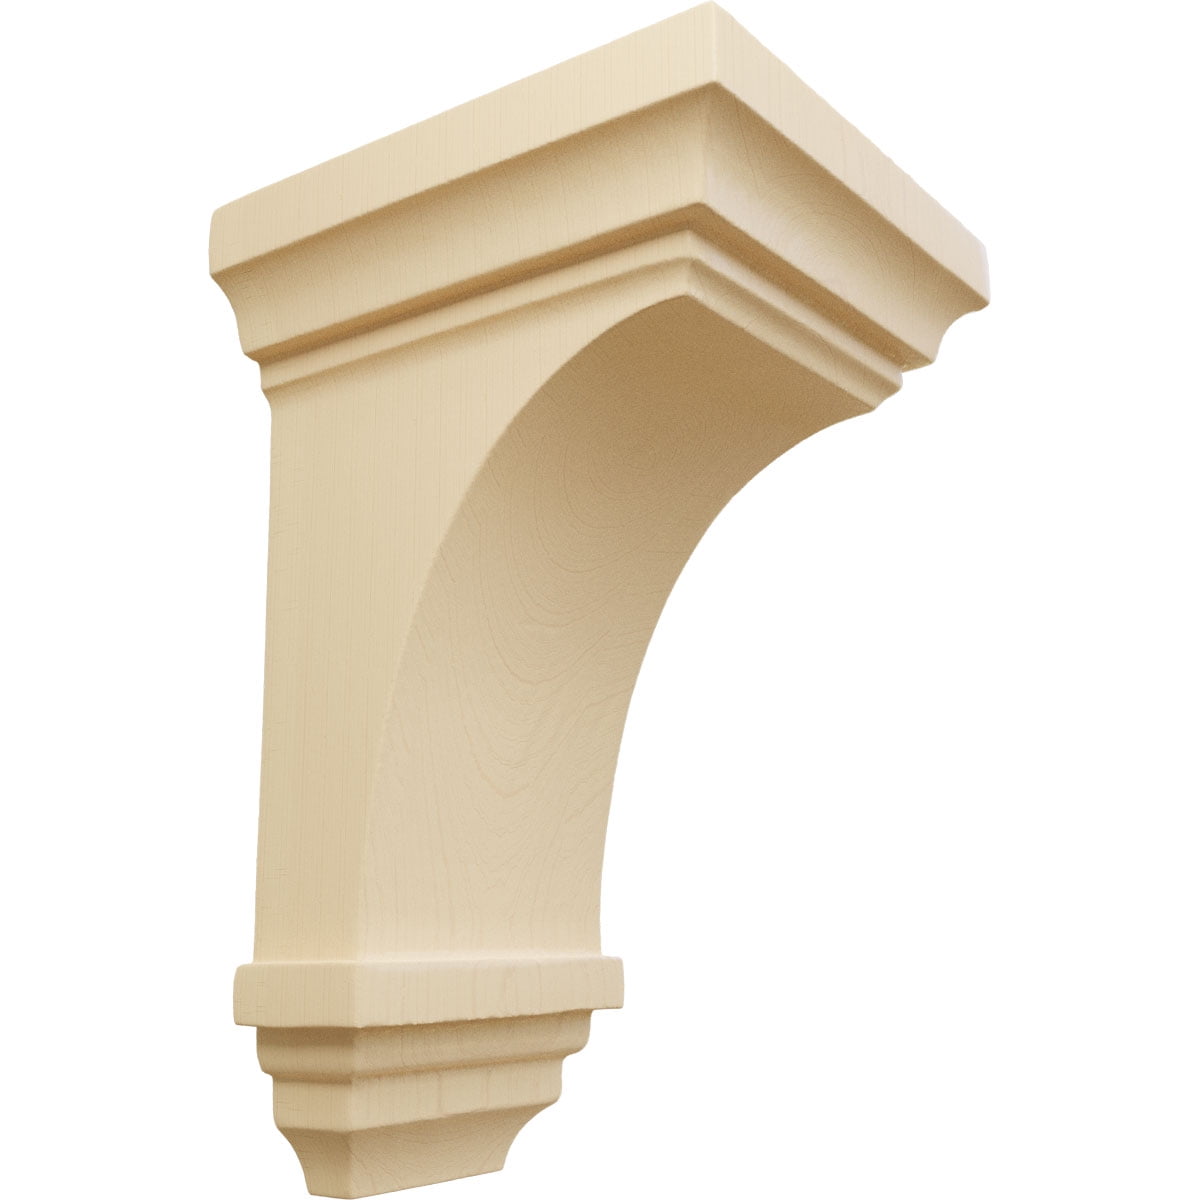 -Para WOOD One 3-3/4" x 3-1/2" x 6-1/2" Small Scrolled Wood Corbel 